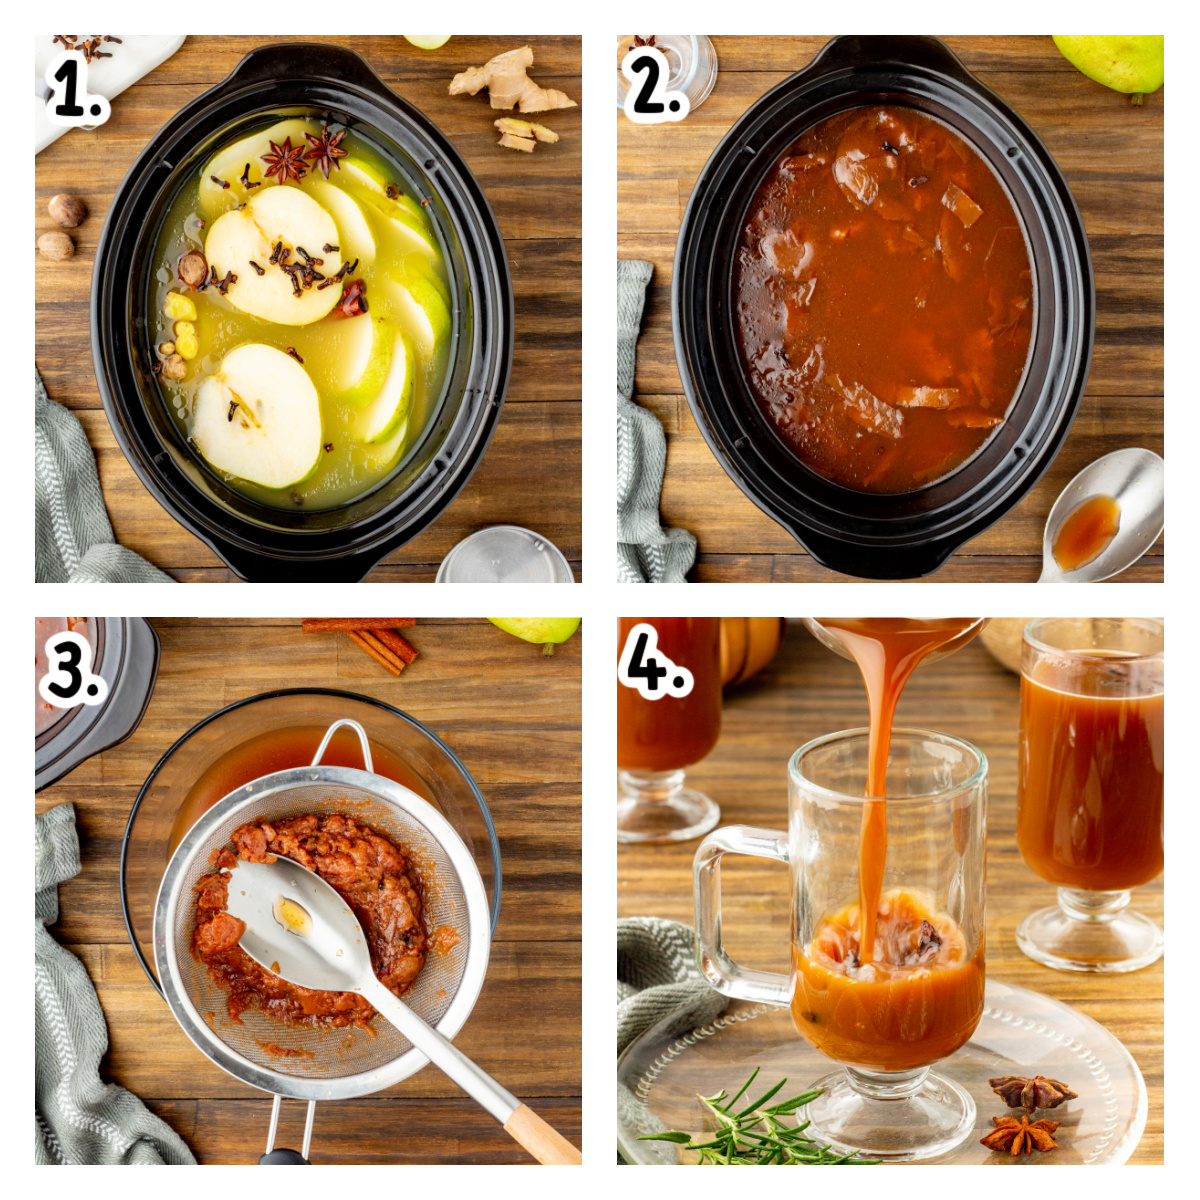 Four images showing how to make pear cider in a slow cooker.